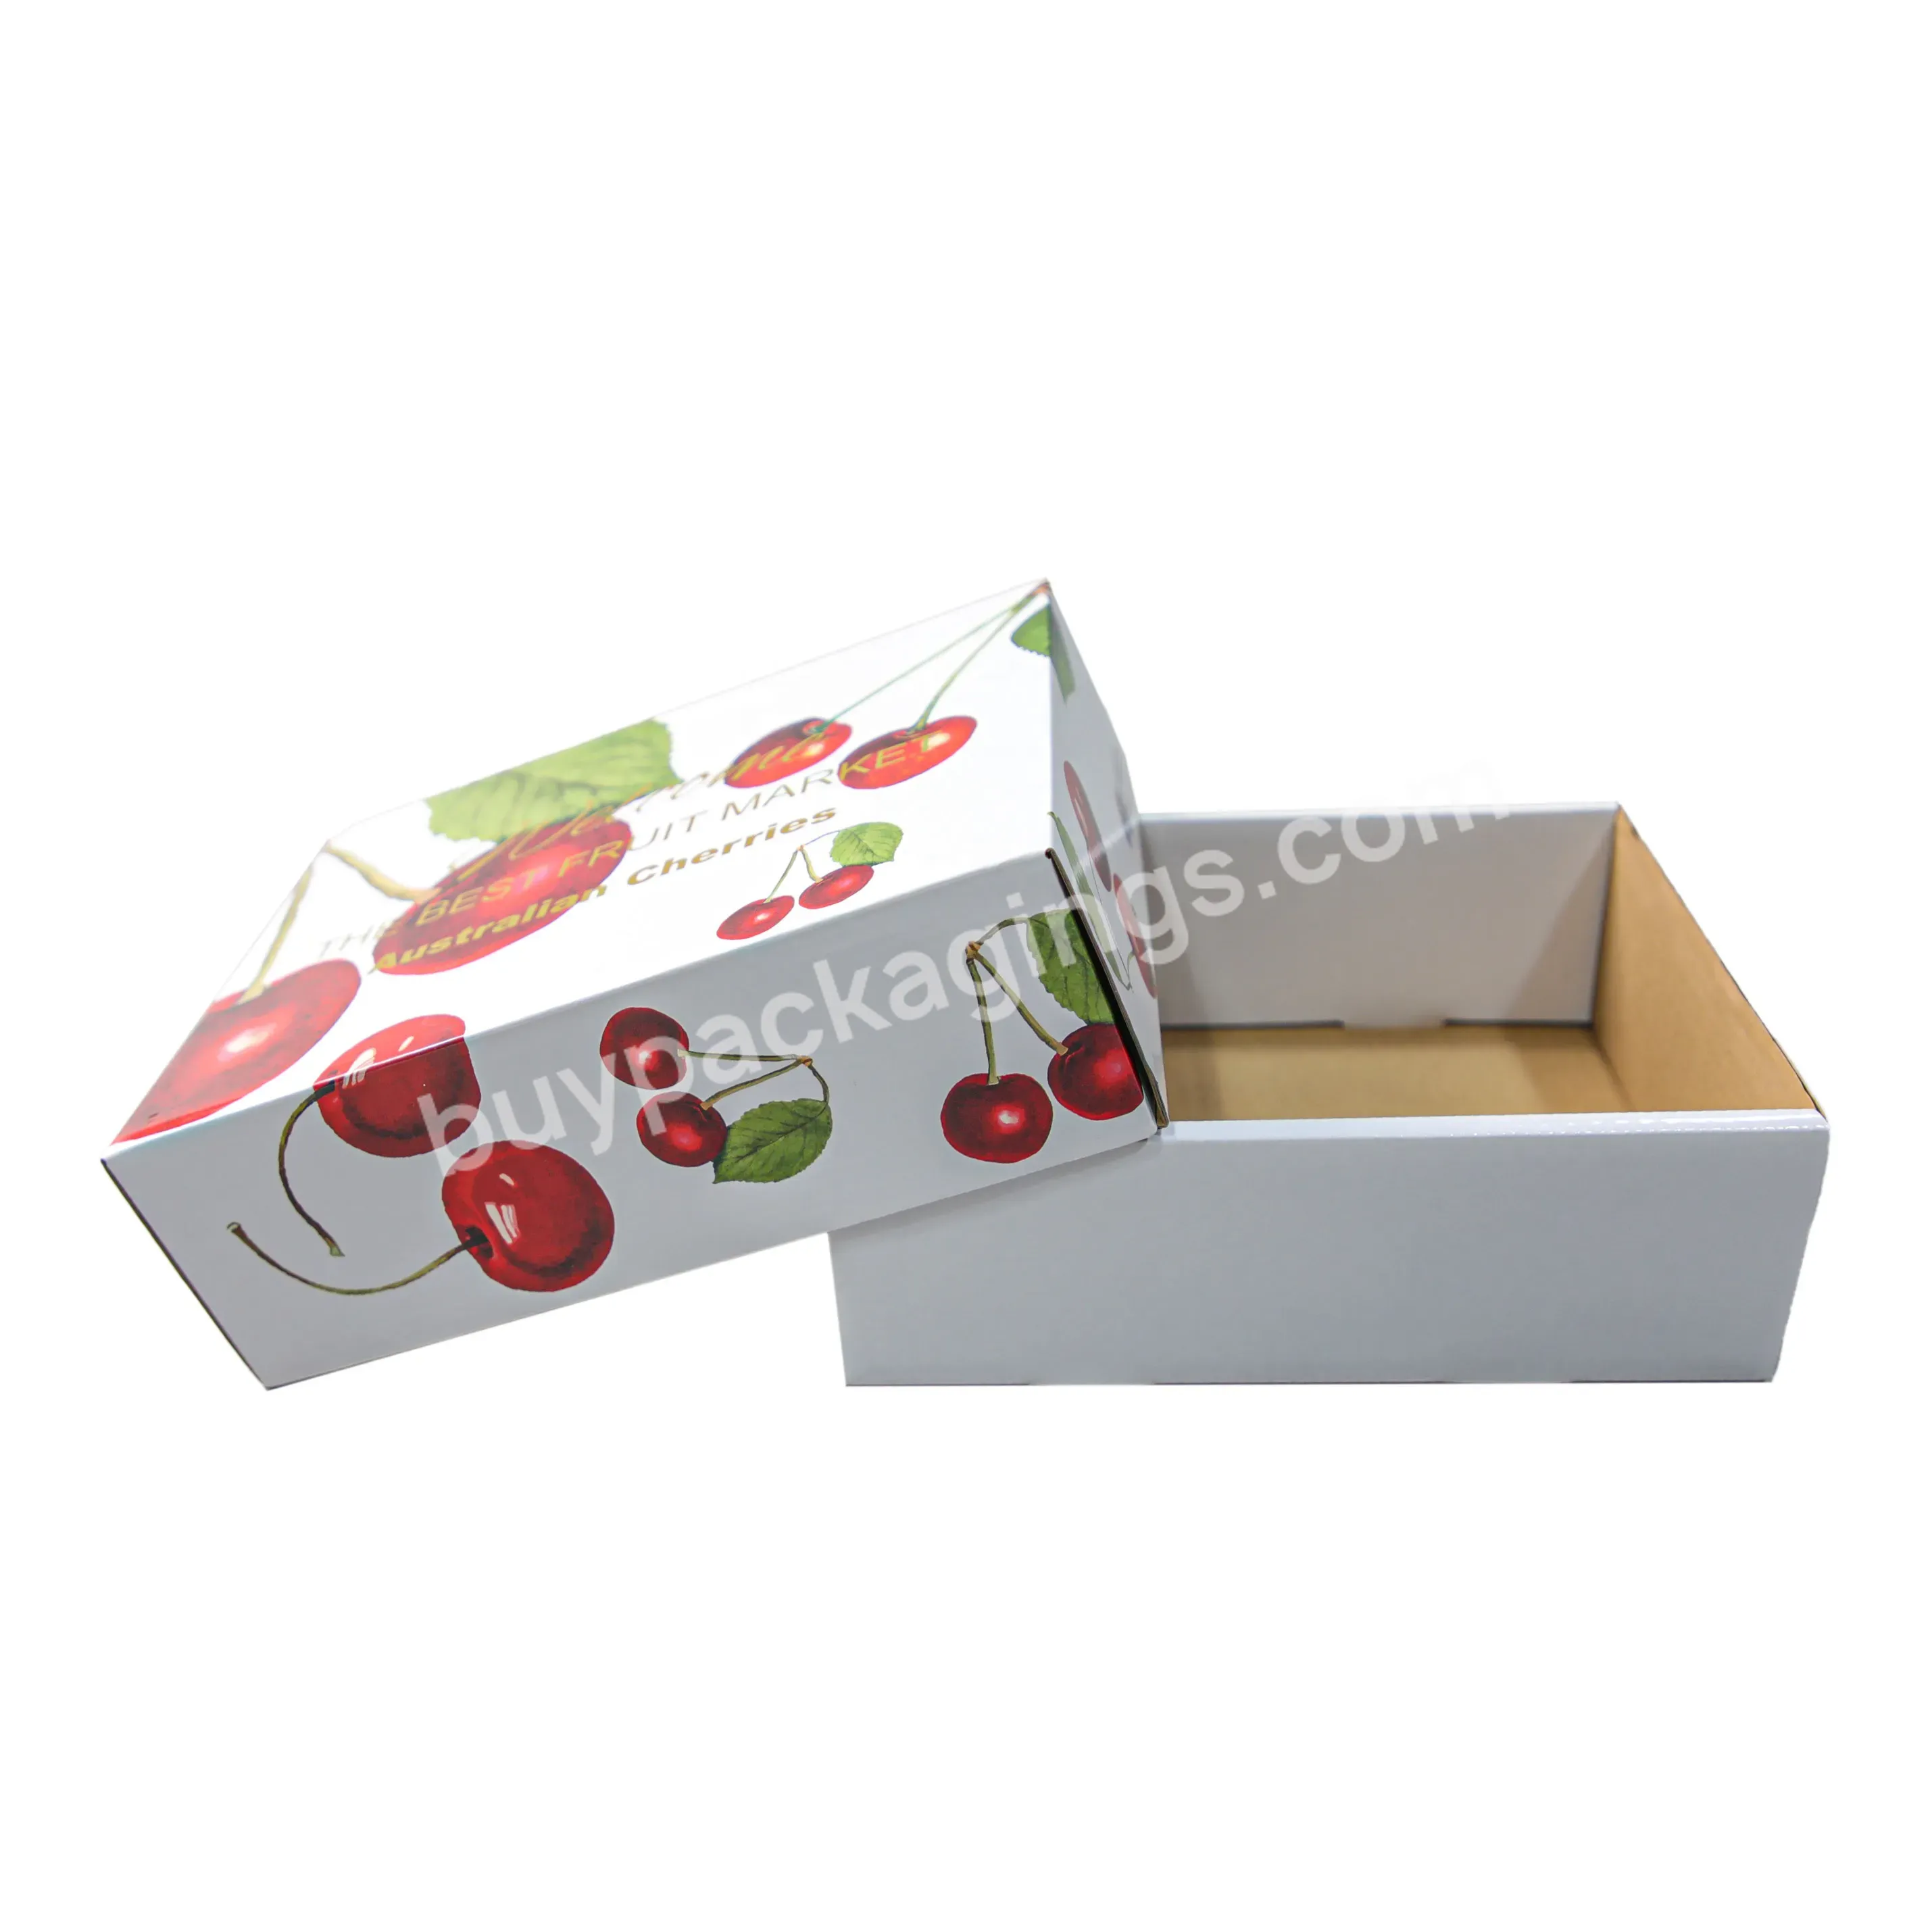 Wholesale Customized Colorful Print Recyclable Corrugated Cardboard Packaging Box Lid&bottom Type Box For Cherry - Buy Recyclable Corrugated Cardboard Box,Lid&bottom Type Box For Cherry,Corrugated Cardboard Packaging Box.